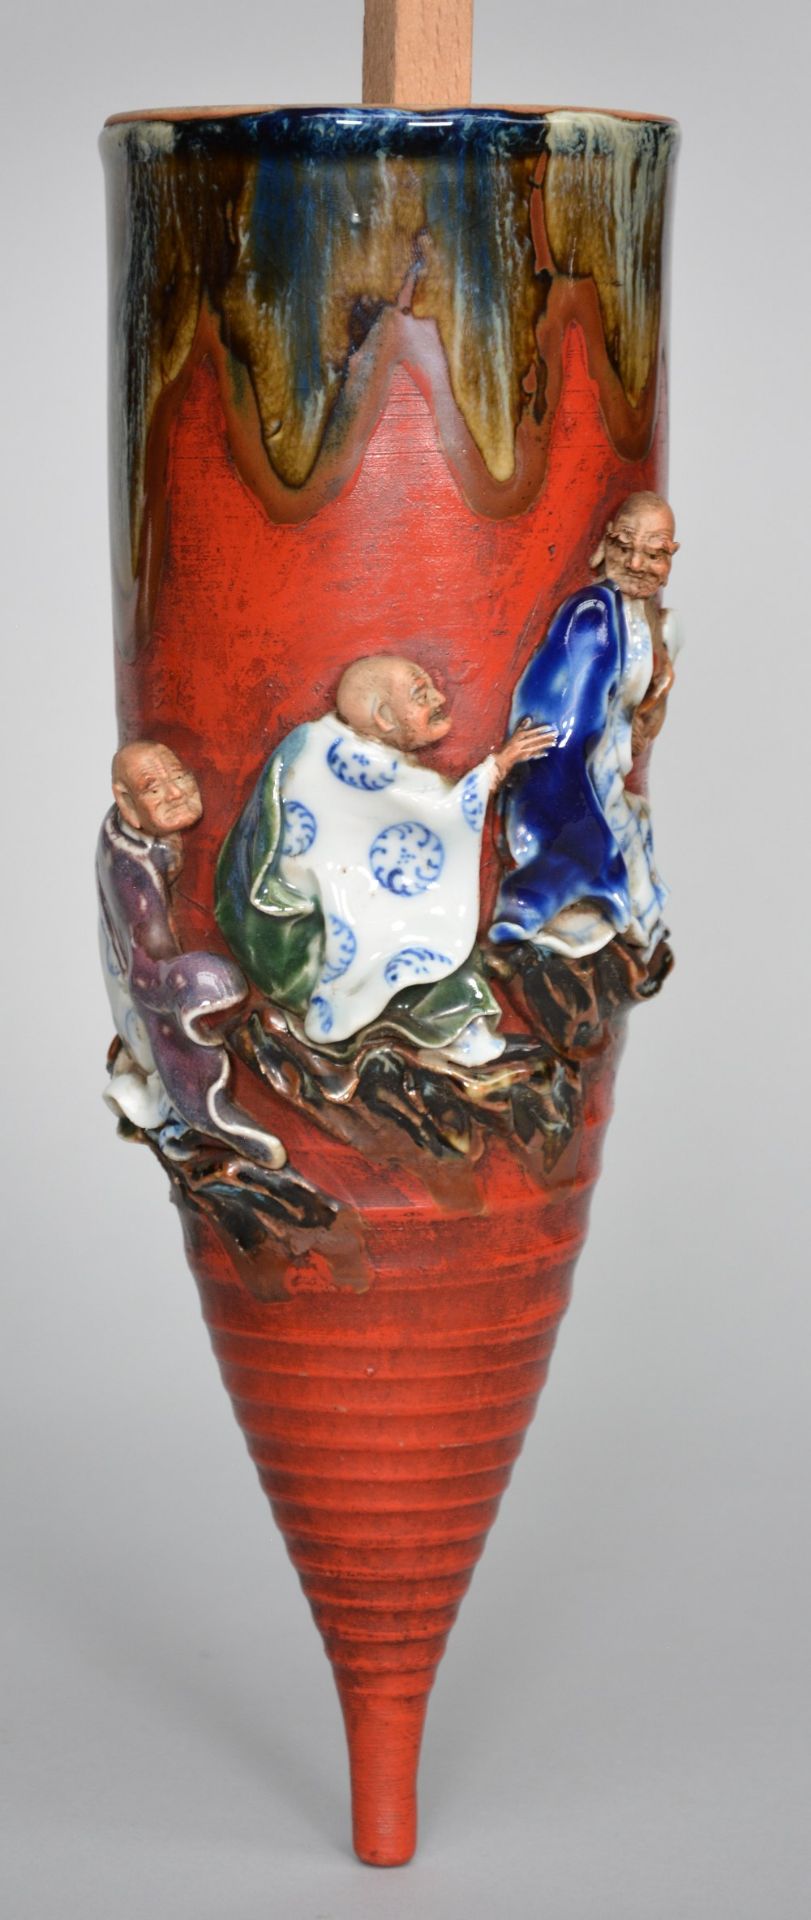 A Sumida Gawa vase, Japan, flambé glazed, polychrome and relief decorated with figures, marked, - Bild 9 aus 10